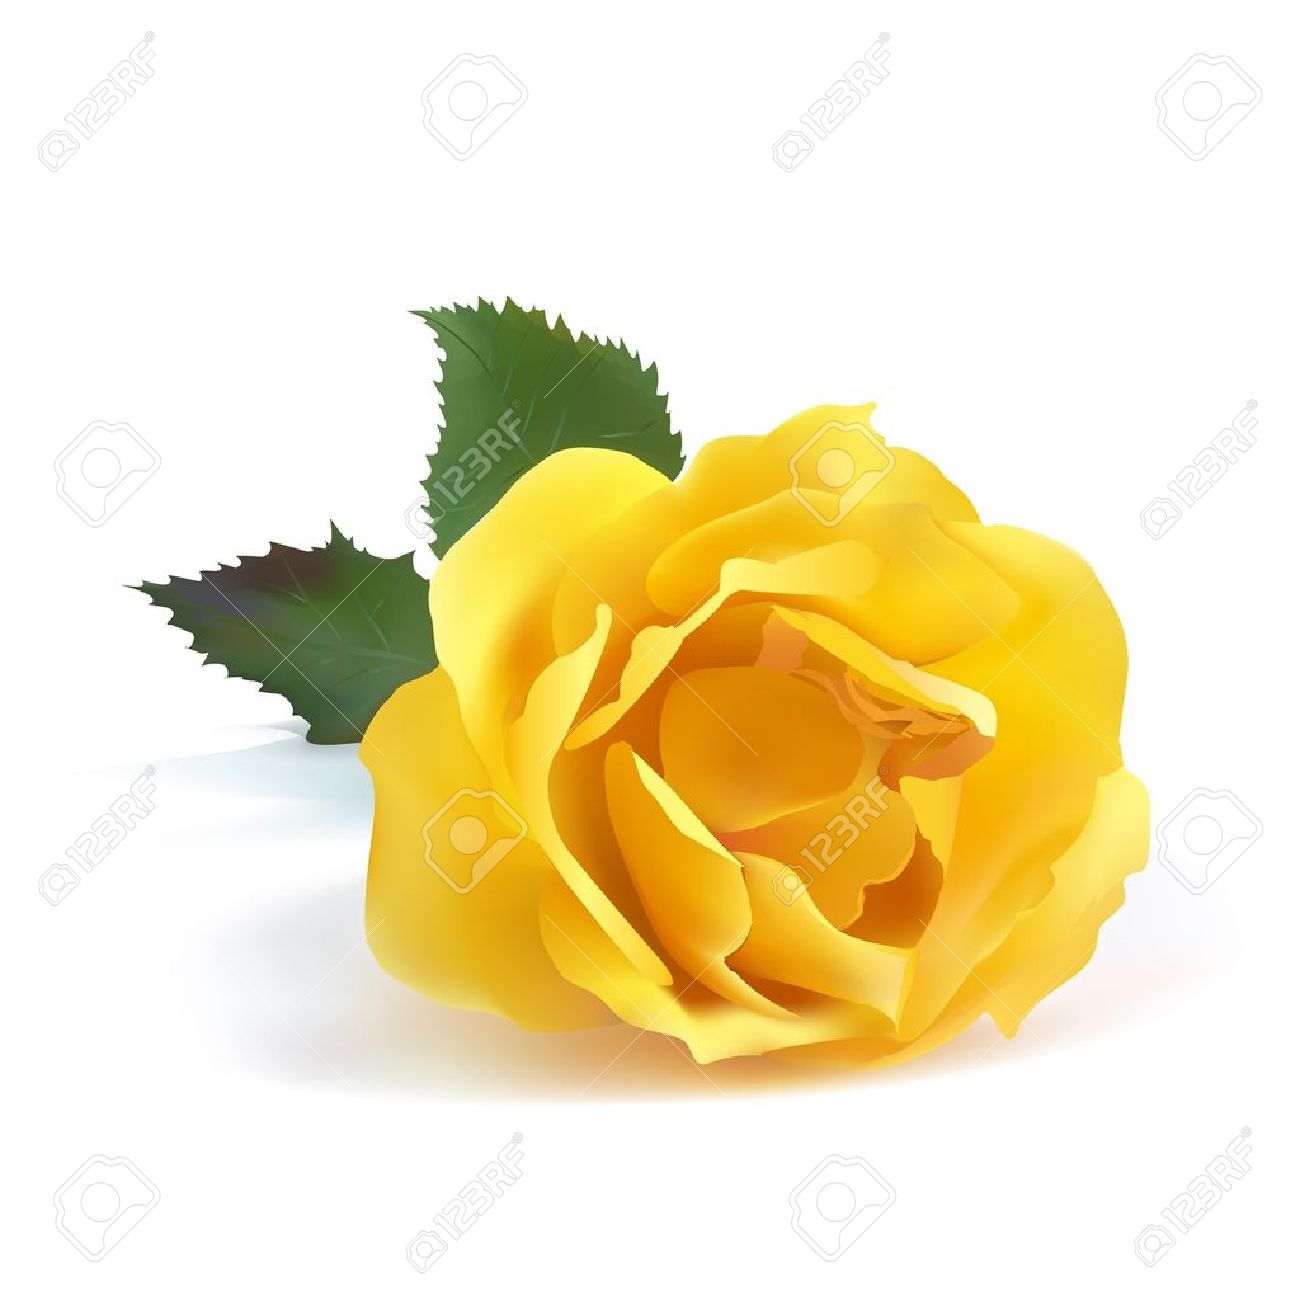 Yellow rose hd clipart.